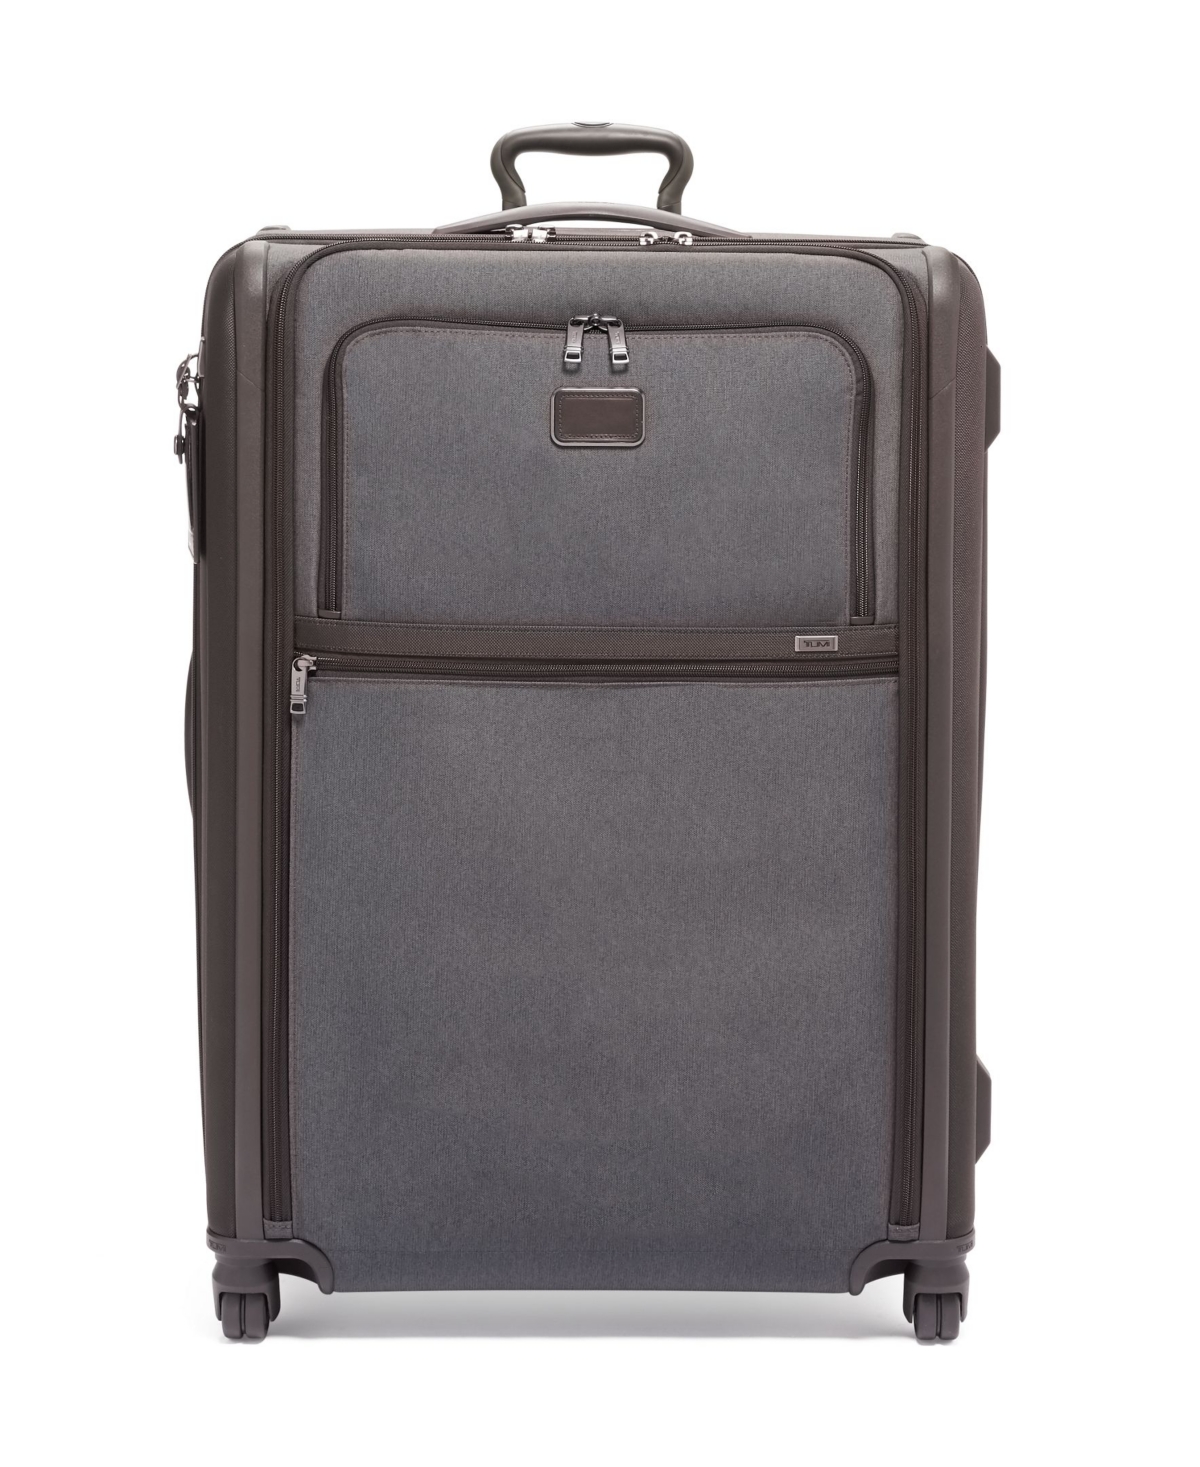 Alpha 3 Extended Trip Expandable 4 Wheeled Packing Case - Anthracite